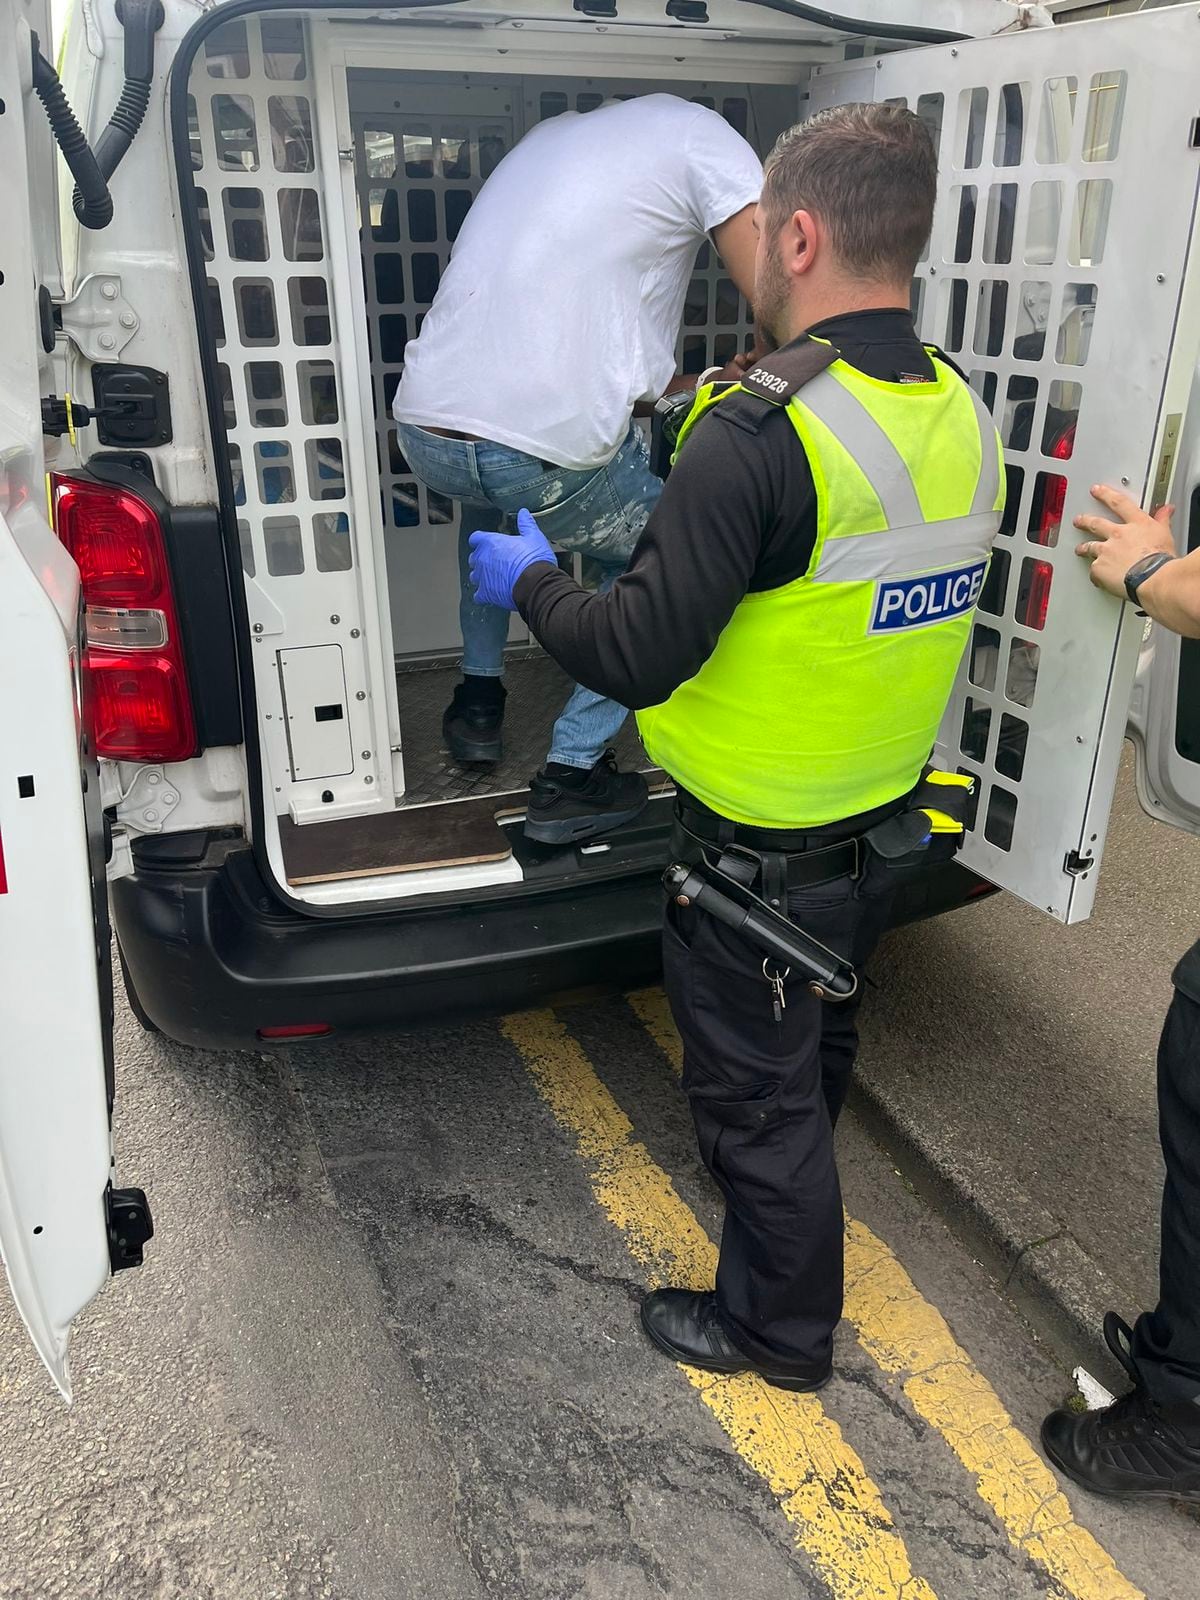 The man was arrested this morning. Photo: @DudleyTownWMP